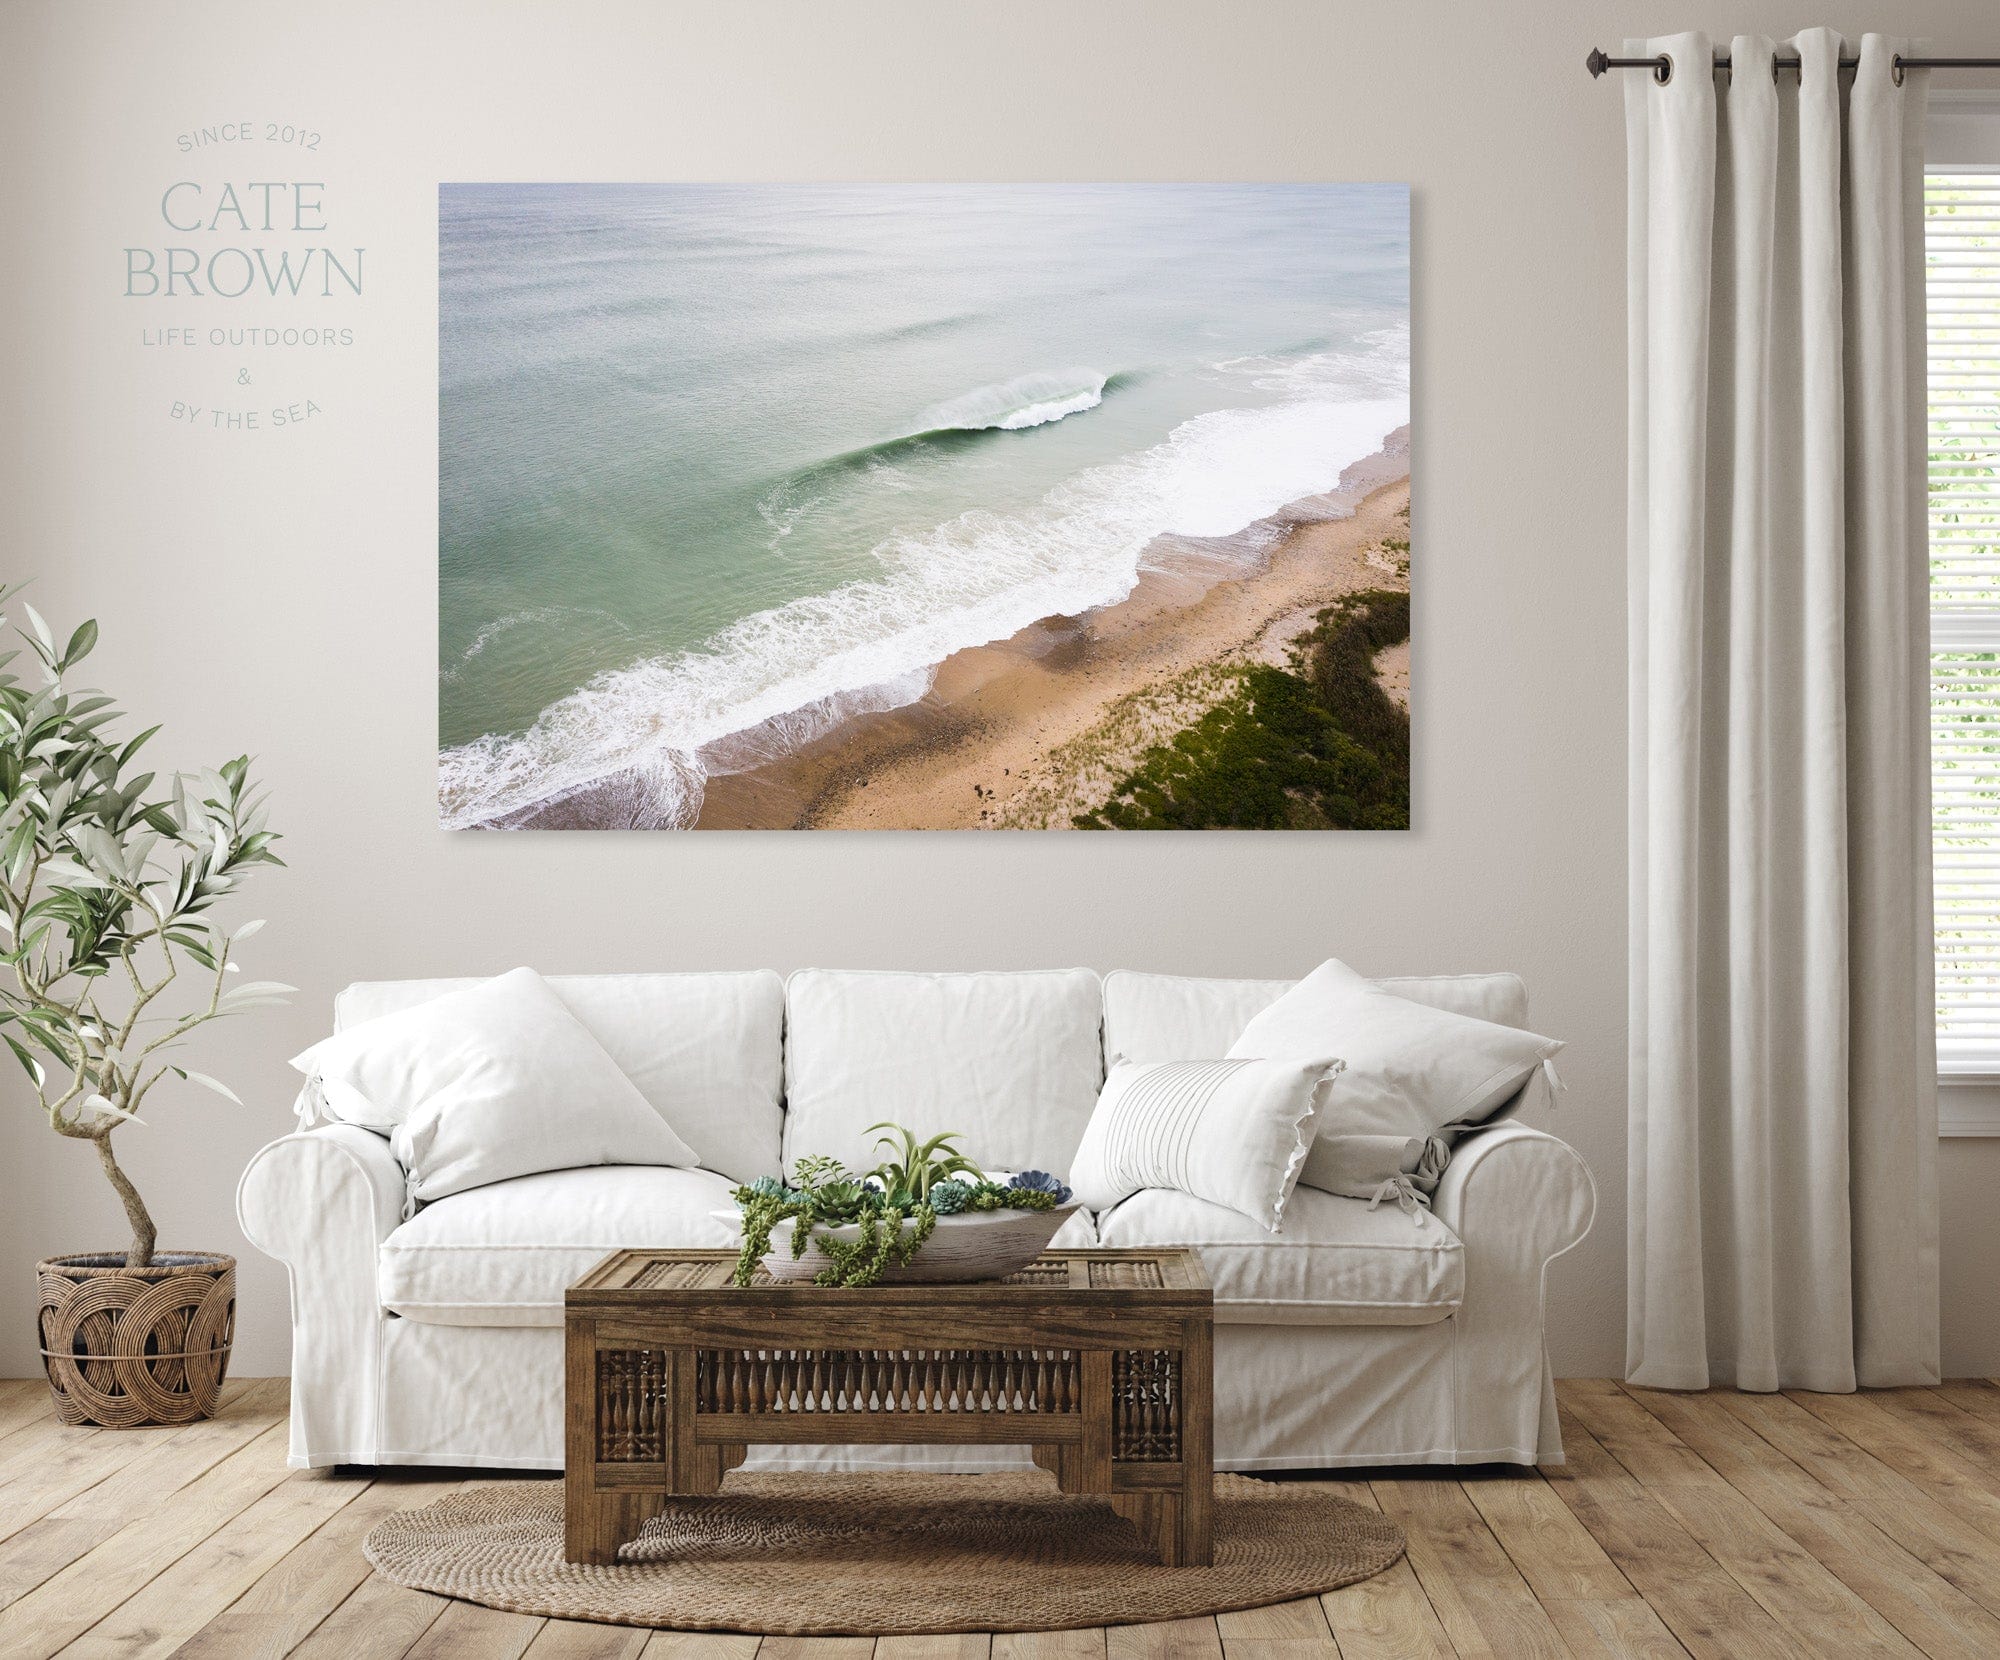 Cate Brown Photo Canvas / 16"x24" / None (Print Only) Ocean View from Moonstone #4  //  Aerial Photography Made to Order Ocean Fine Art